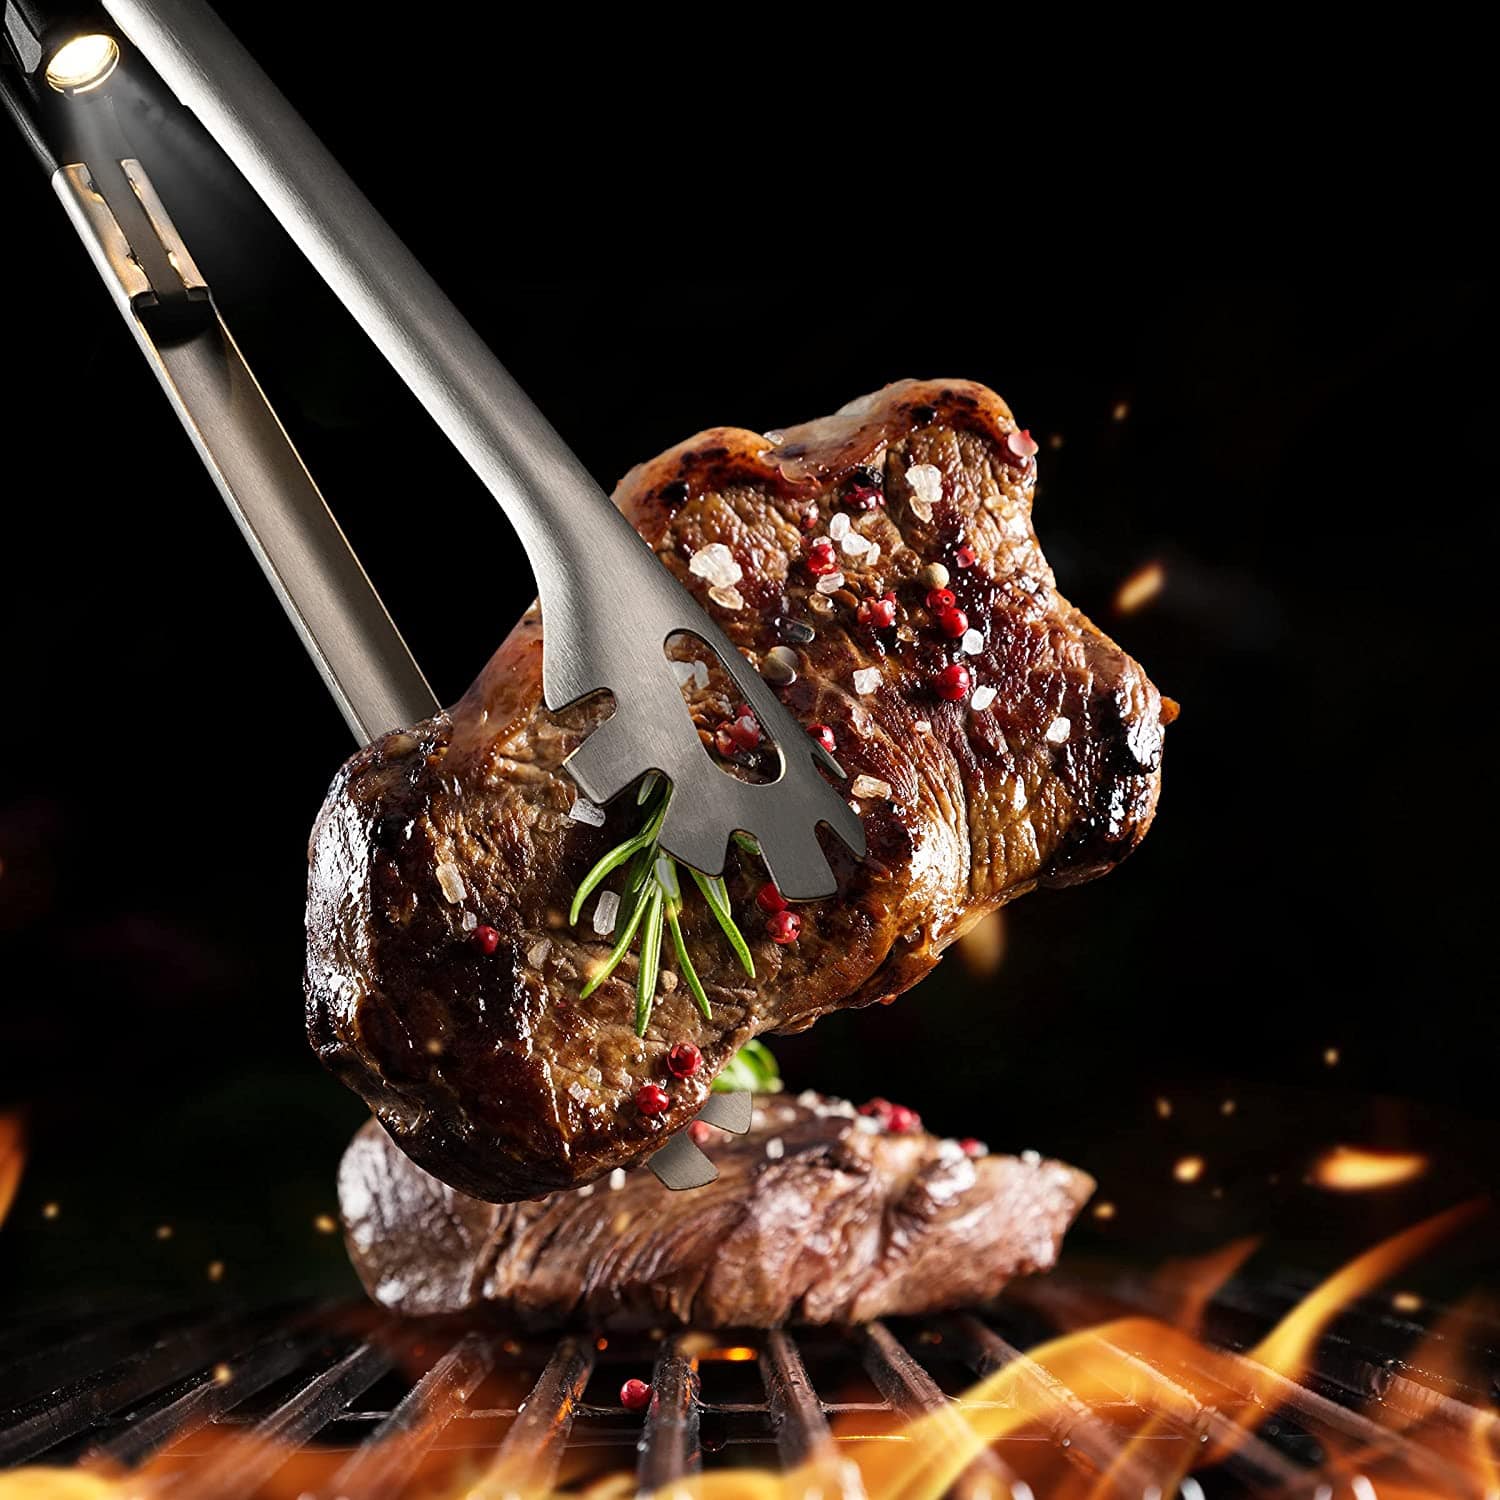 Best grill tongs with LED light- ChefGiant with LED Flashlight with meat